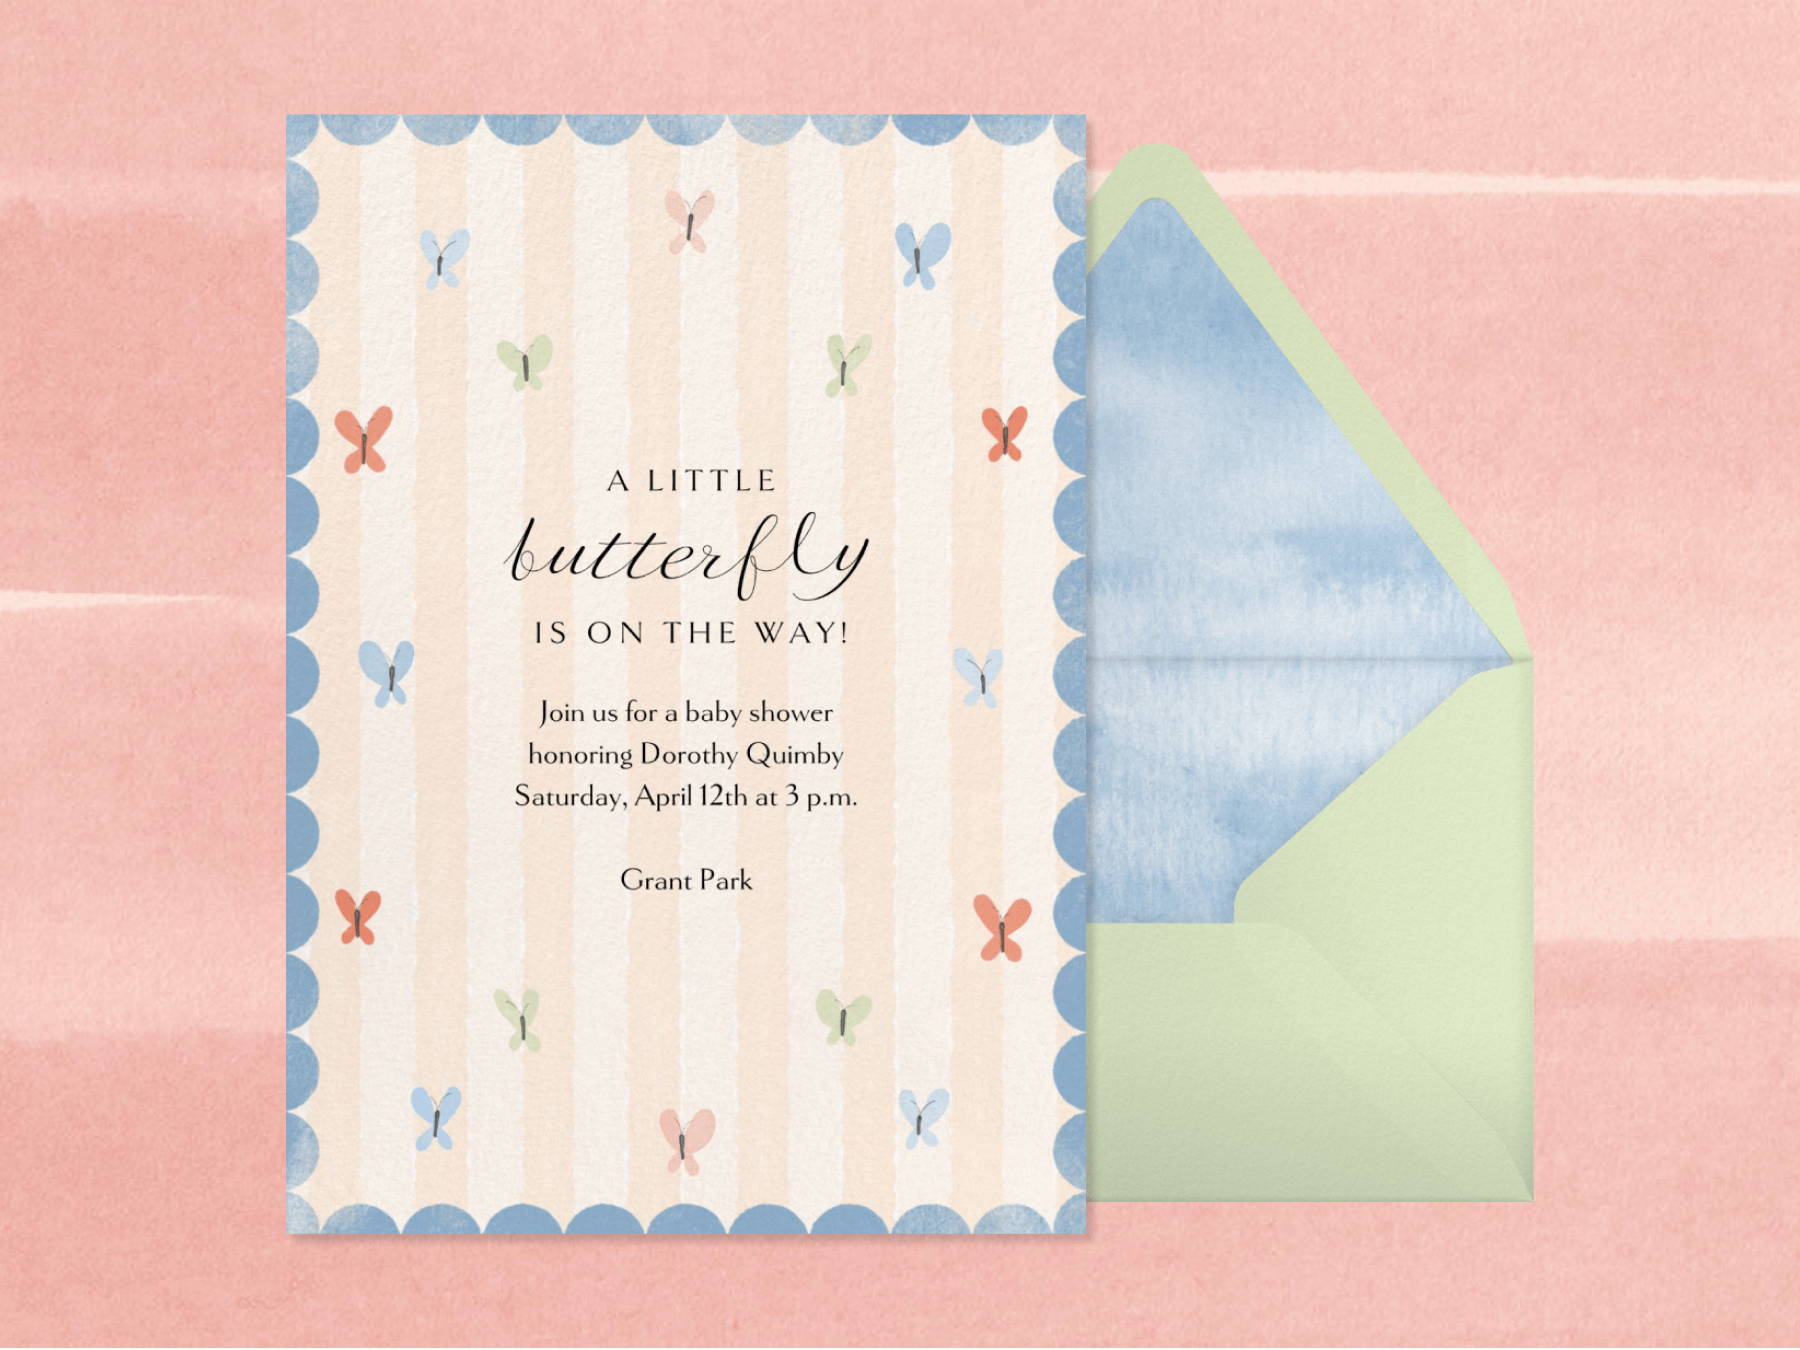 A baby shower invitation that reads “A little butterfly is on the way!” has light pink stripes, a blue scalloped border, and simplistic multicolored butterflies scattered about beside a green envelope with blue liner on a pink backdrop.